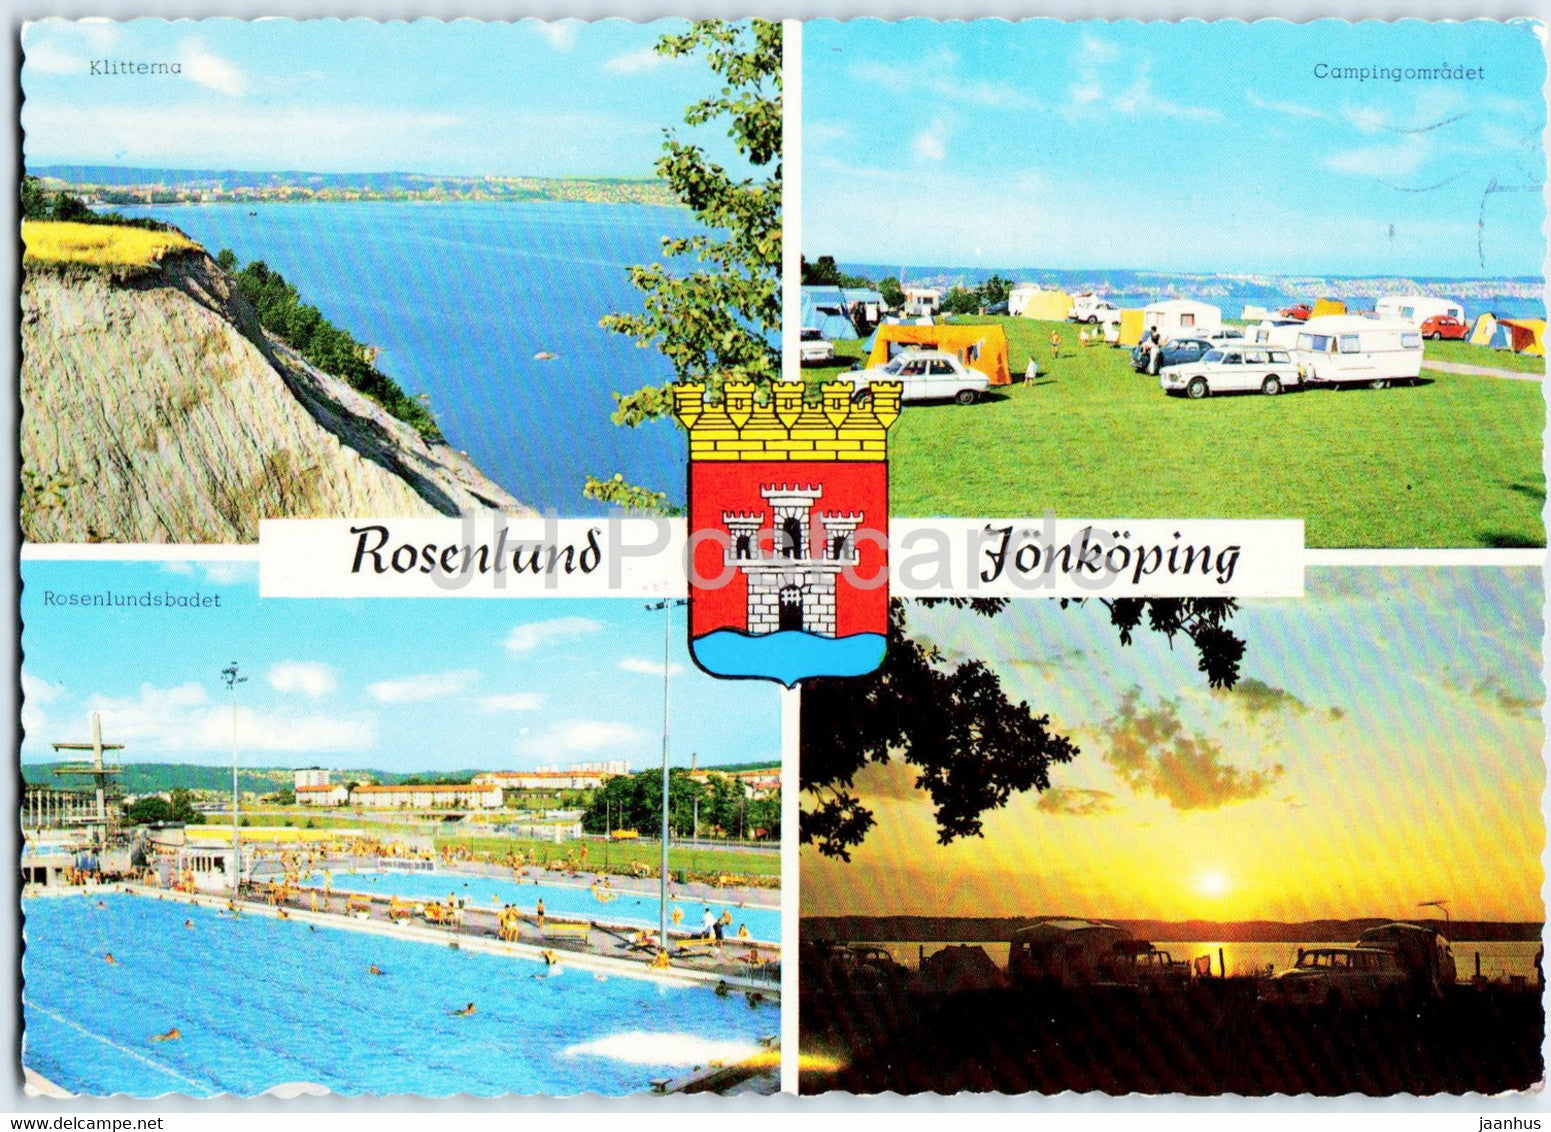 Rosenlund - Jonkoping - camping - pool - multiview - 1980 - Sweden - used - JH Postcards